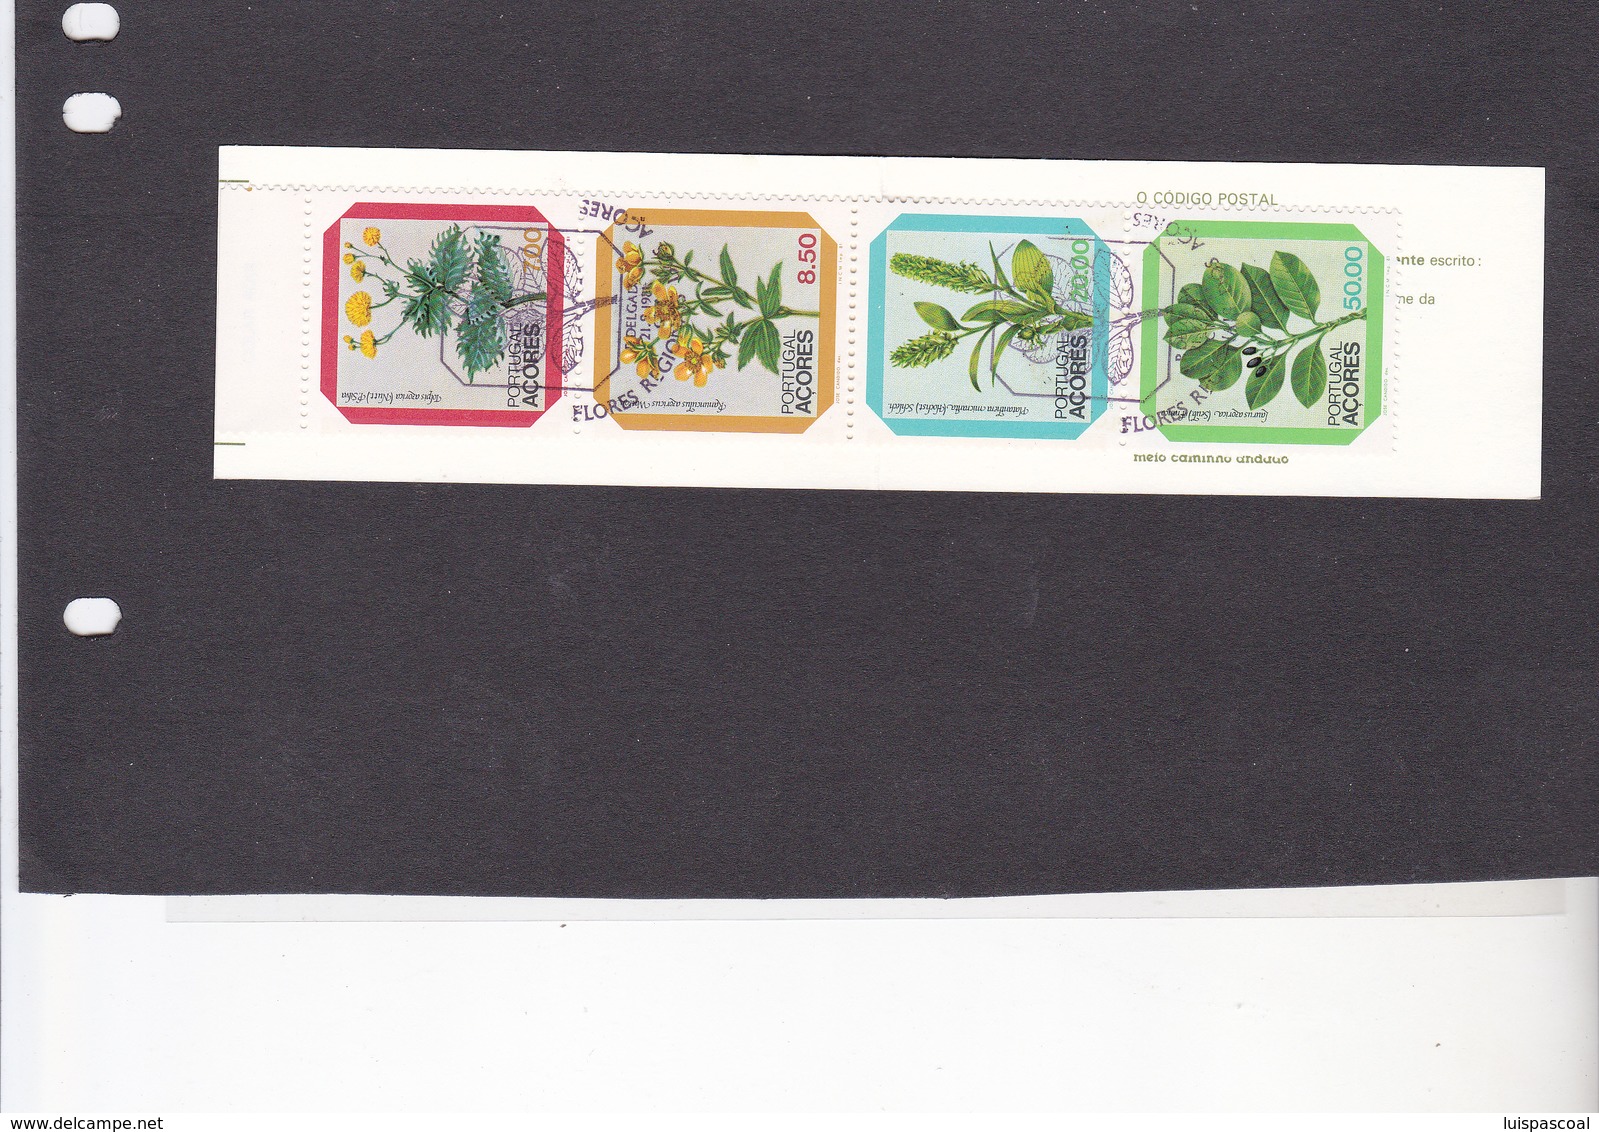 PORTUGAL  / AZORES FDC  BOOKLET FLOWERS (1981) - Booklets